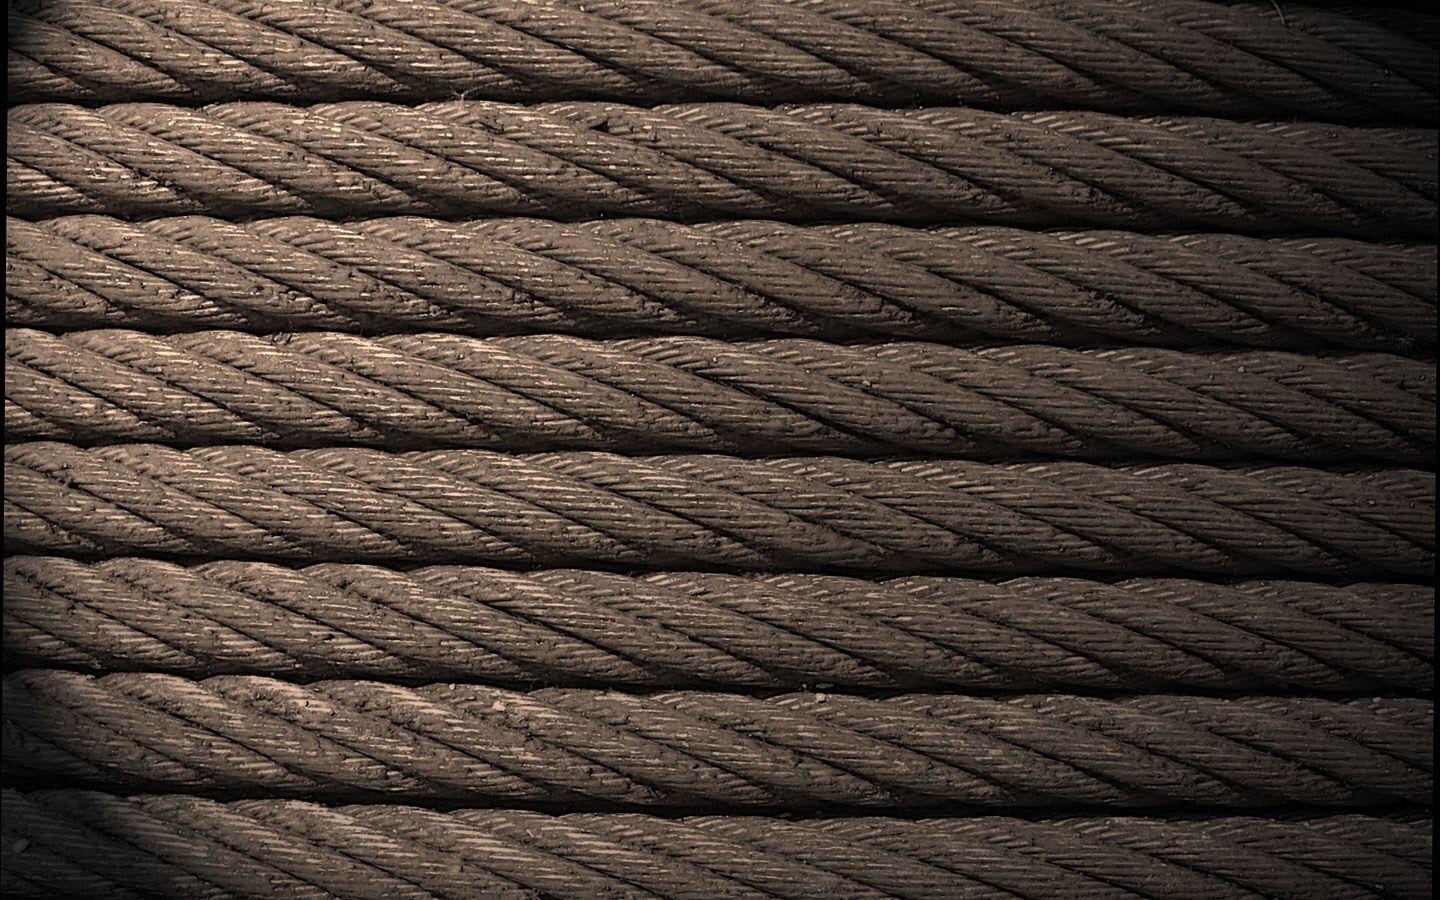 Download wallpapers rope weaving texture 4k macro ropes textures  weaving textures ropes background with ropes for desktop free Pictures  for desktop free